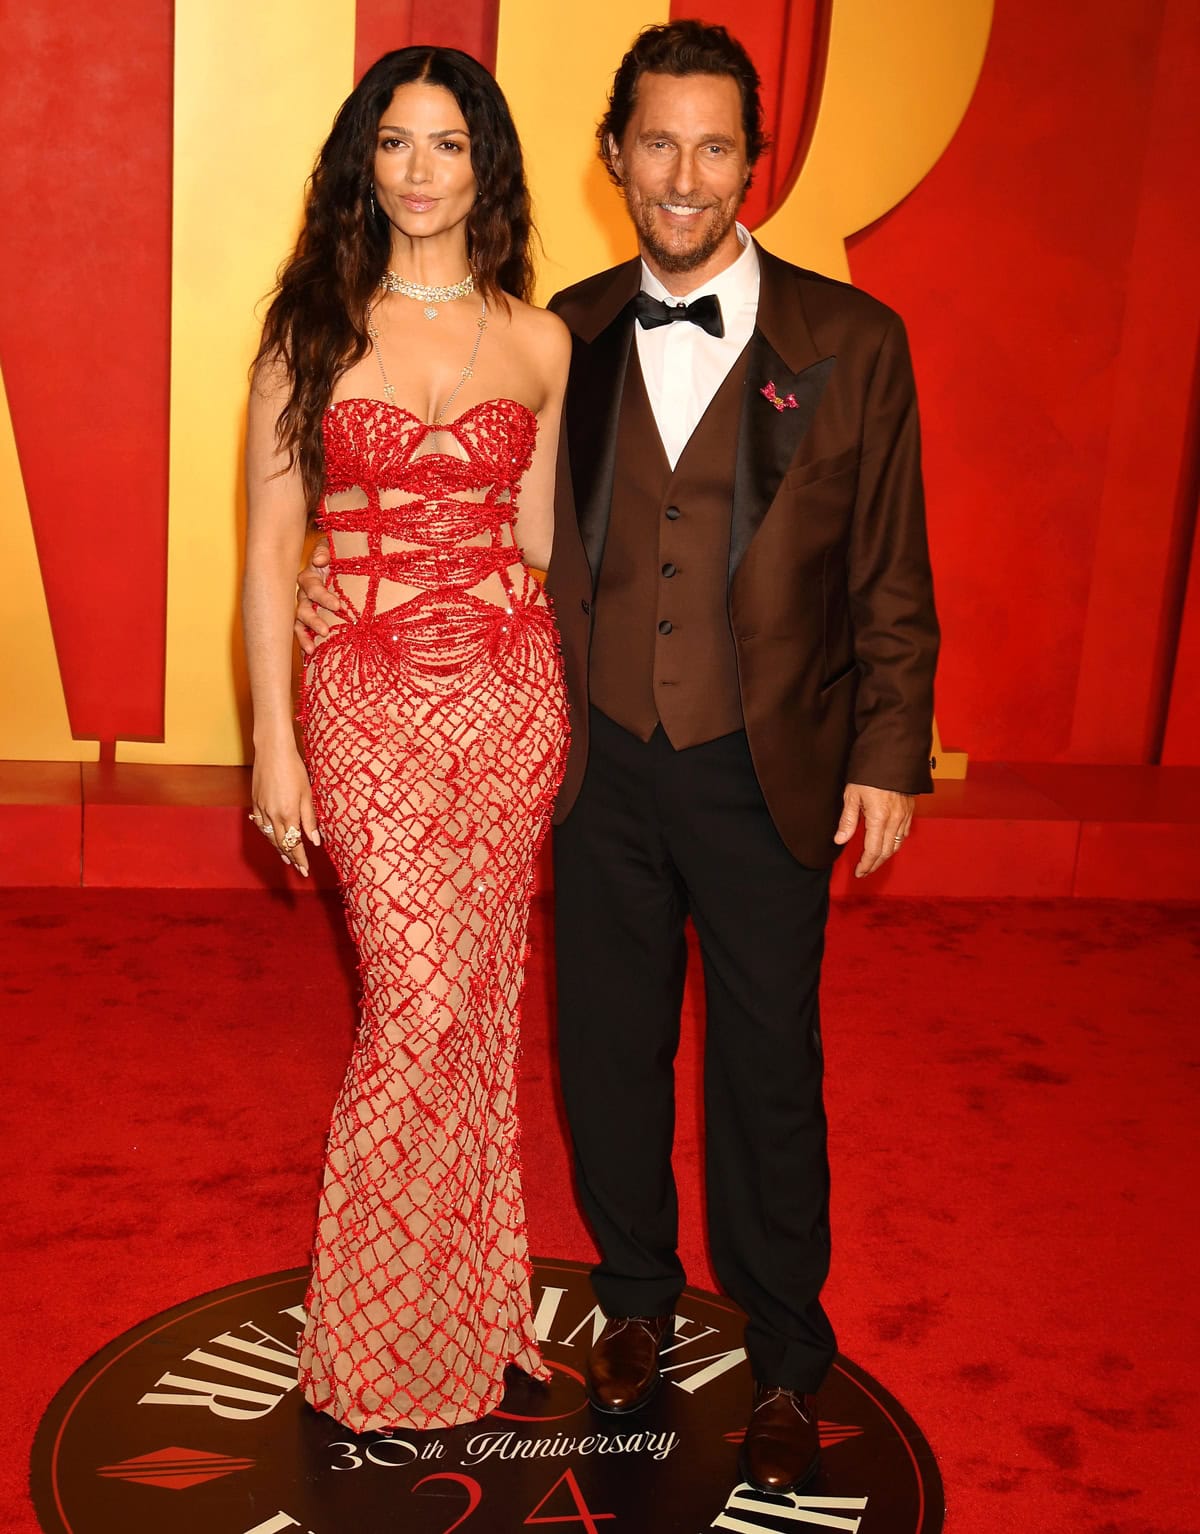 Camila Alves and Matthew McConaughey dazzle at the 2024 Vanity Fair Oscar Party, with Camila in a stunning red lace Tony Ward Couture gown